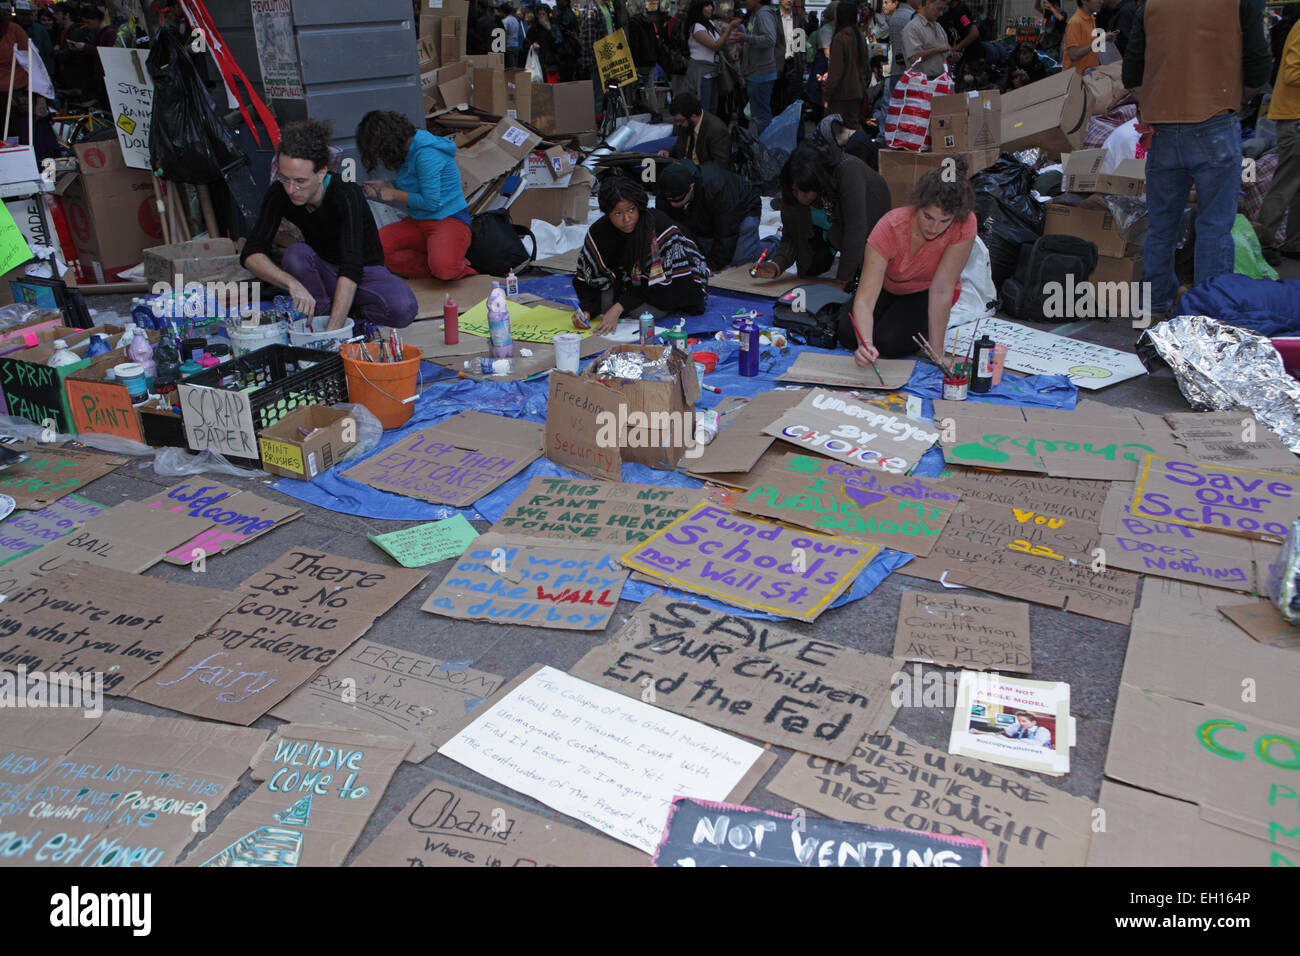 Painted placards displayed on the sidewalk at the Occupy Wall Street protest in Zuccotti Park, New York Stock Photo